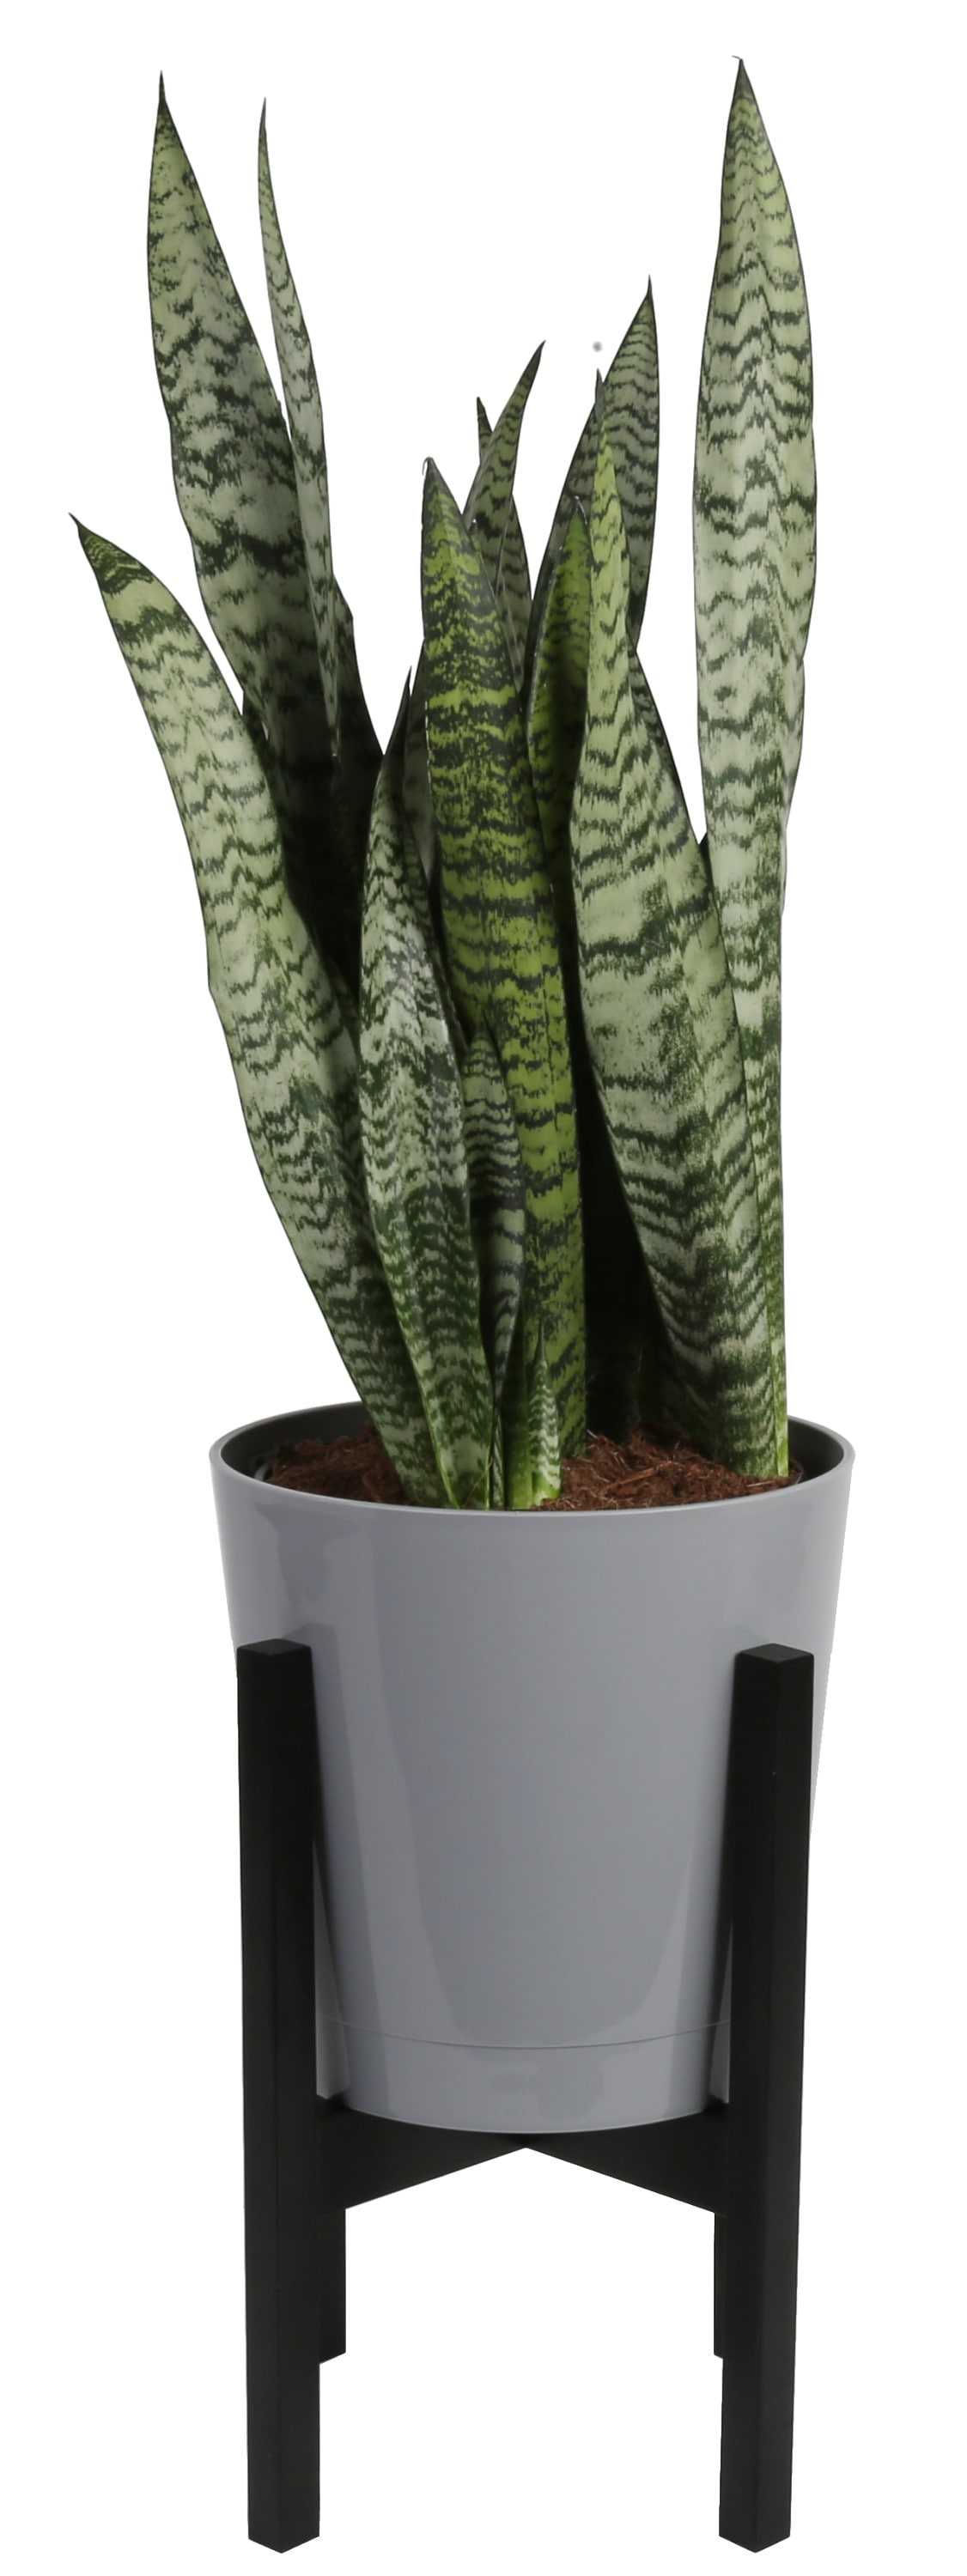 Costa Farms Snake Plant House Plant in 10-in Pot | L-SAN-S-GMC-01-LW